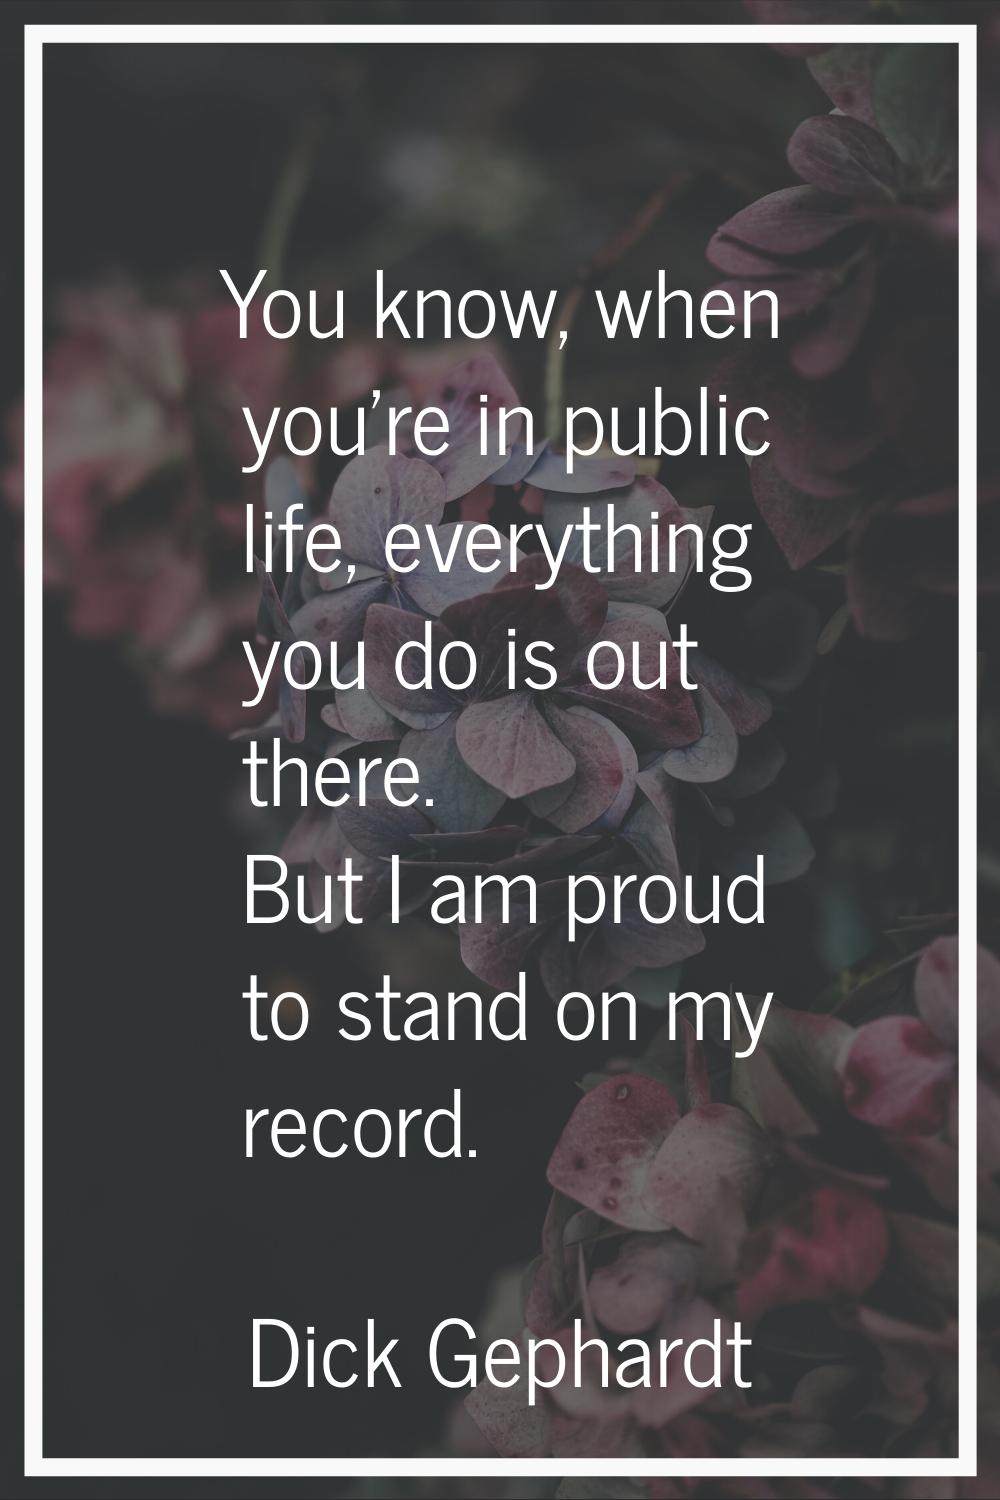 You know, when you're in public life, everything you do is out there. But I am proud to stand on my